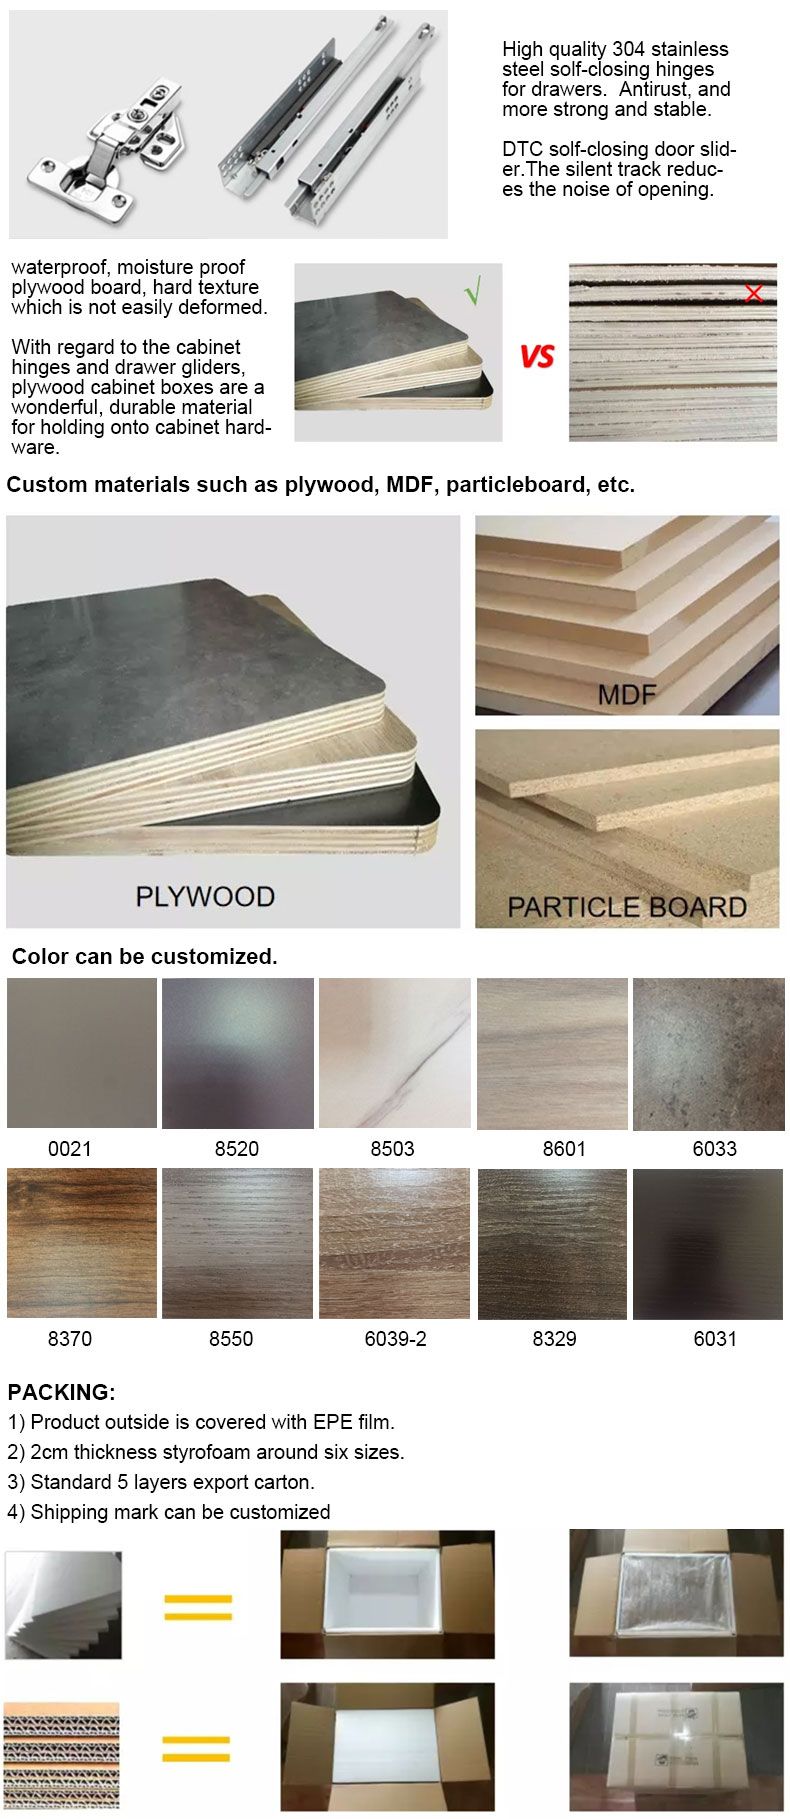 Best plywood for bathroom cabinets